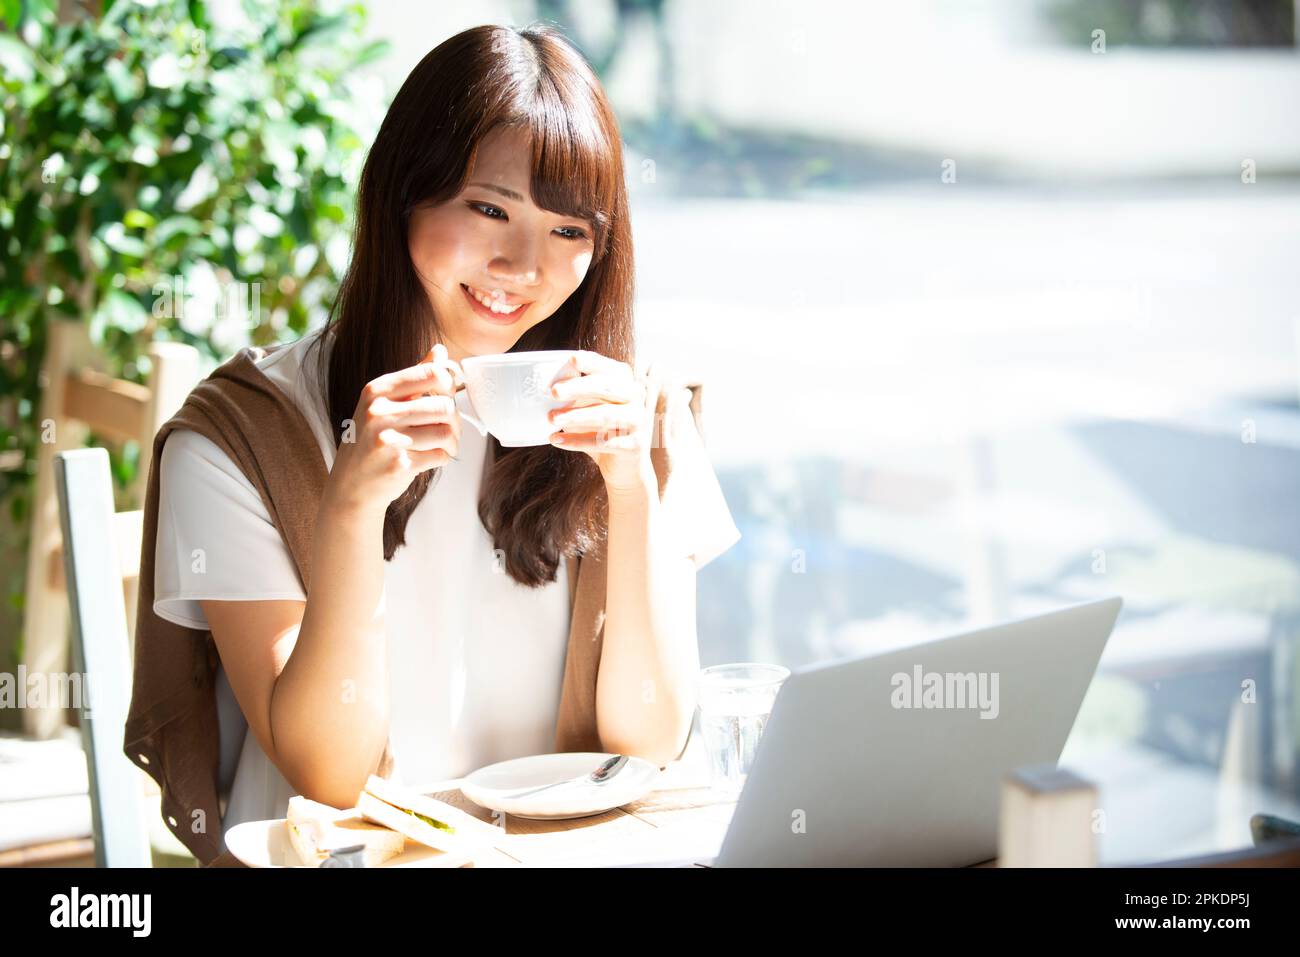 Woman drinking coffee at a cafe Stock Photo